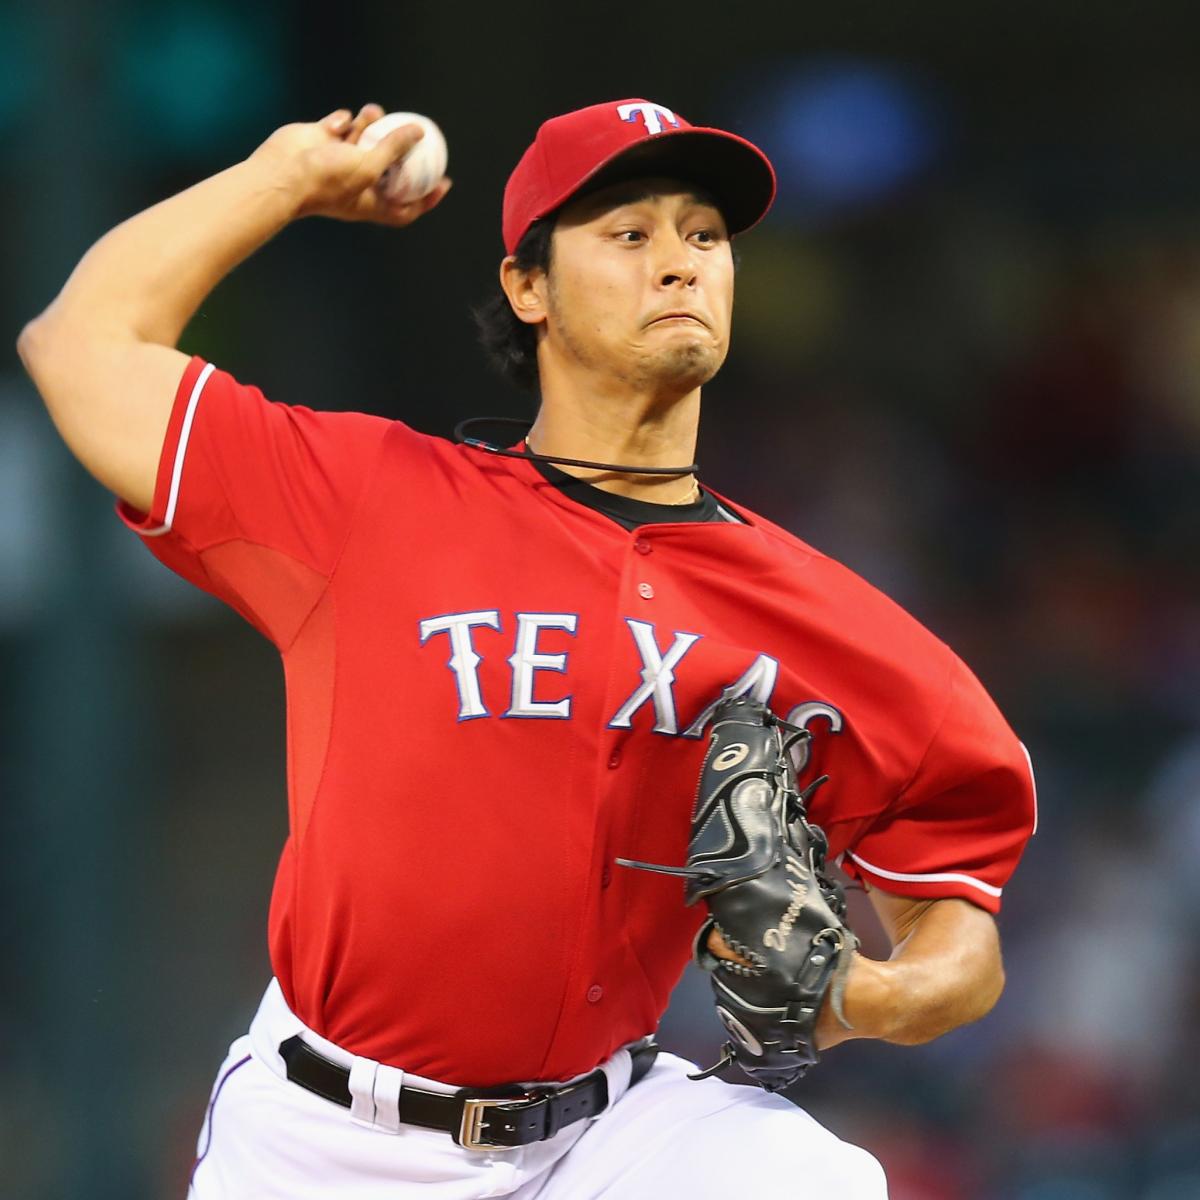 The 10 Best Pitchers from Japan in MLB History